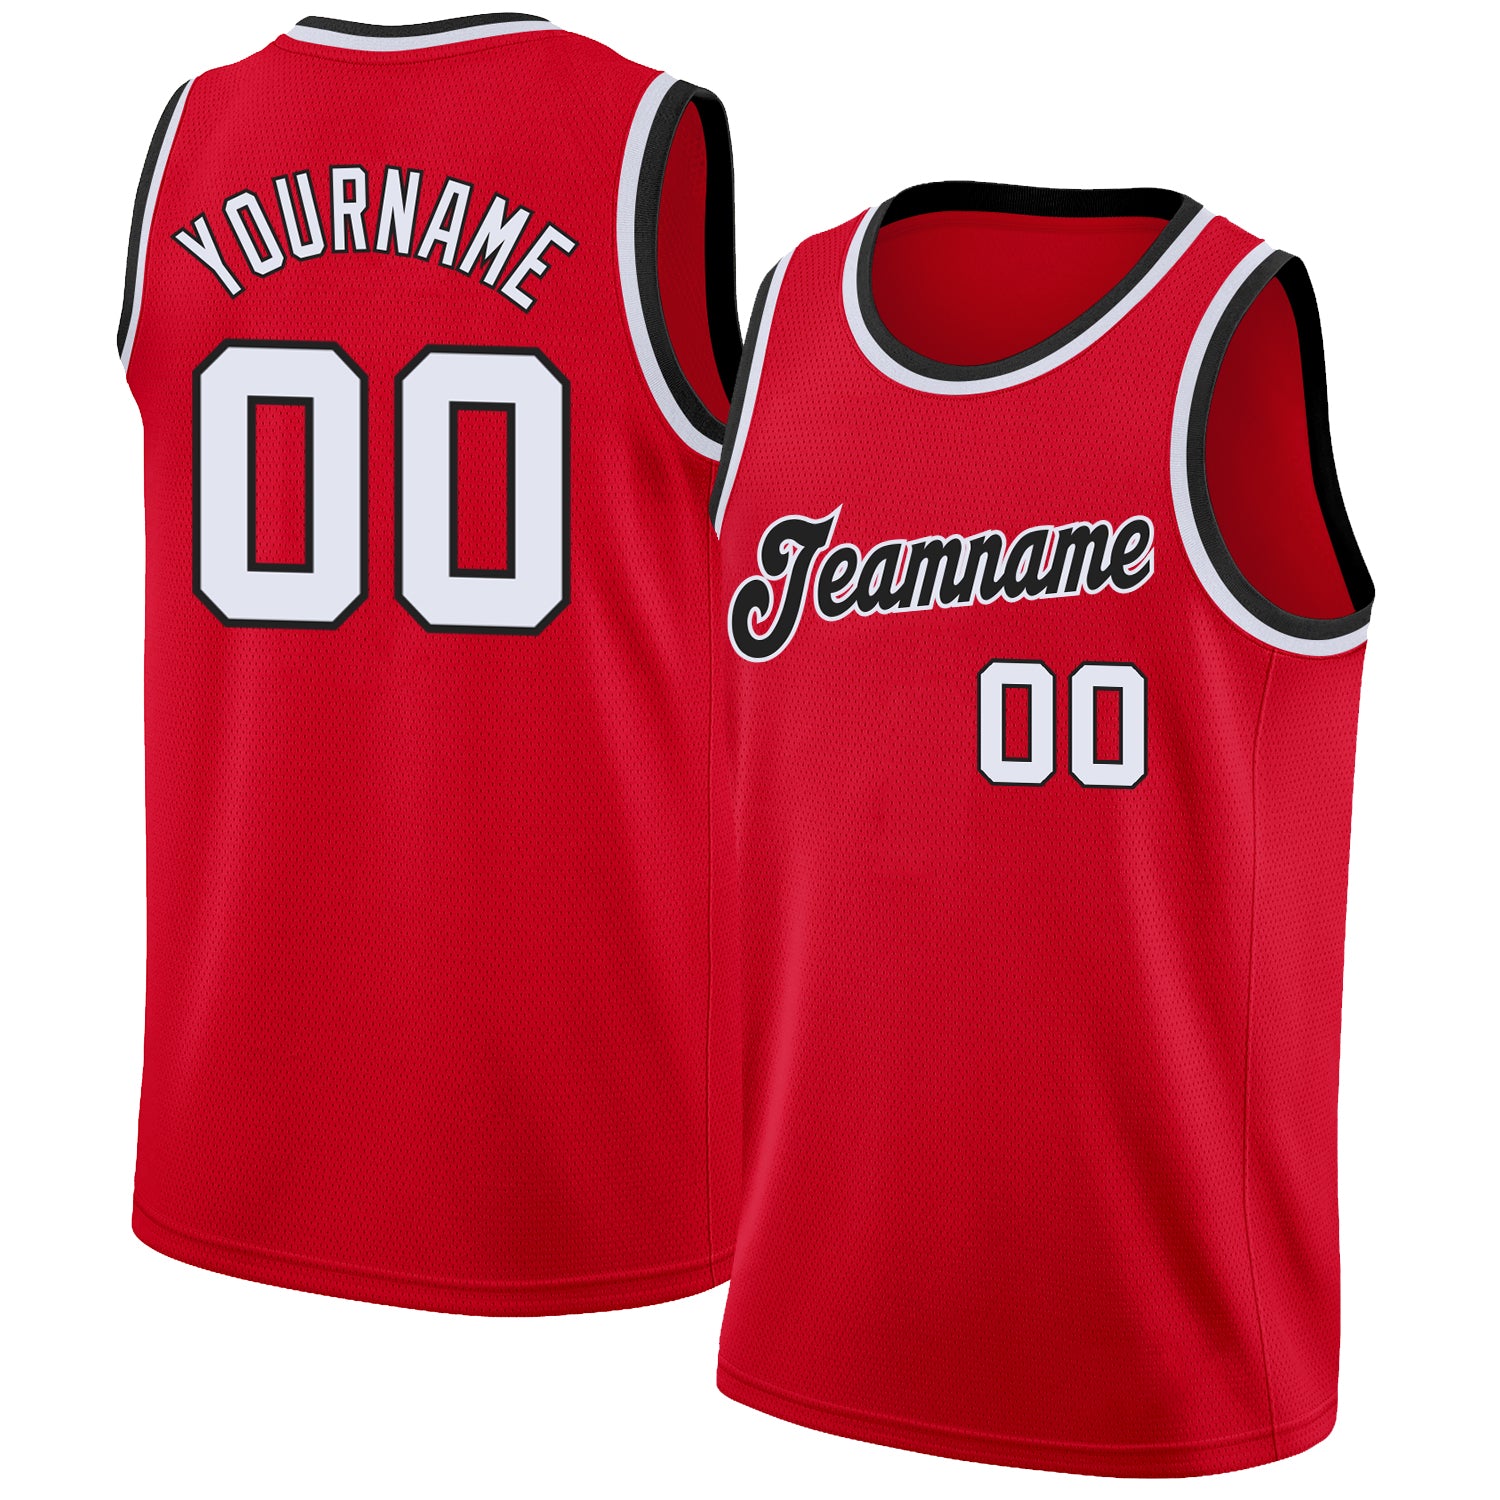 Custom Basketball Jerseys Red Black White and Blue Home -  Israel